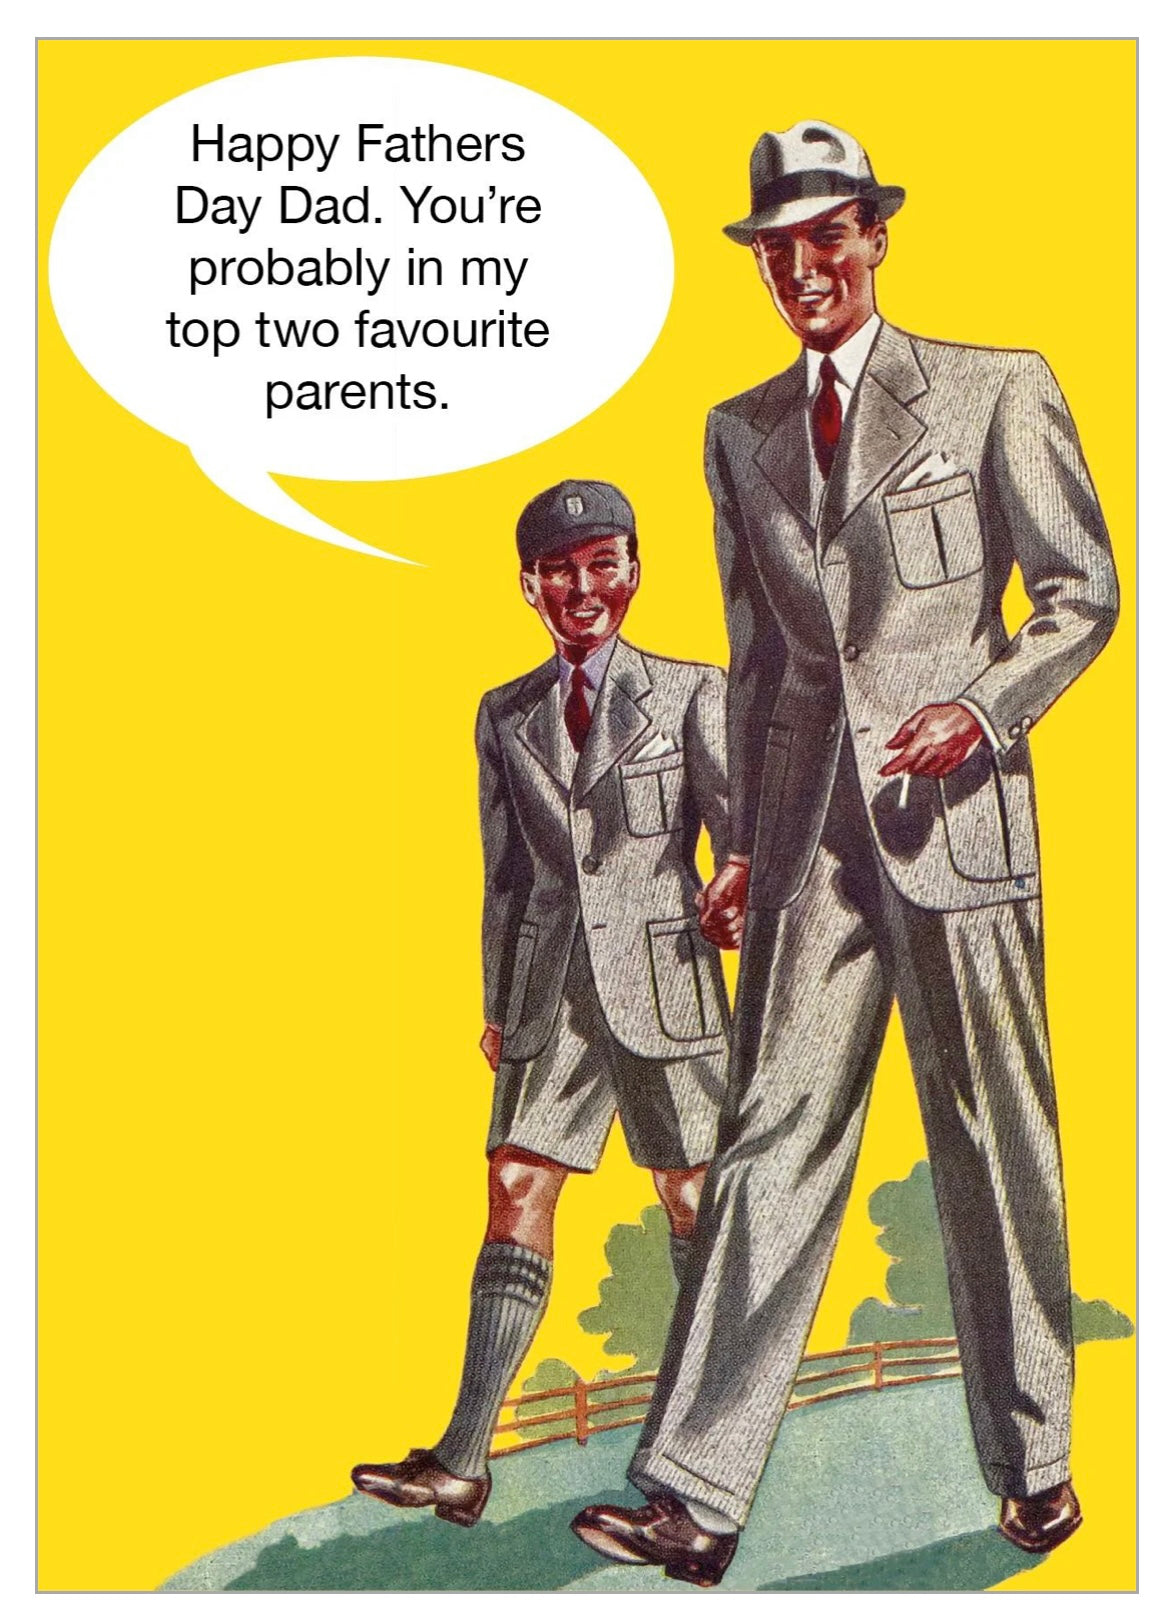 Top Two Parents Father's Day Card